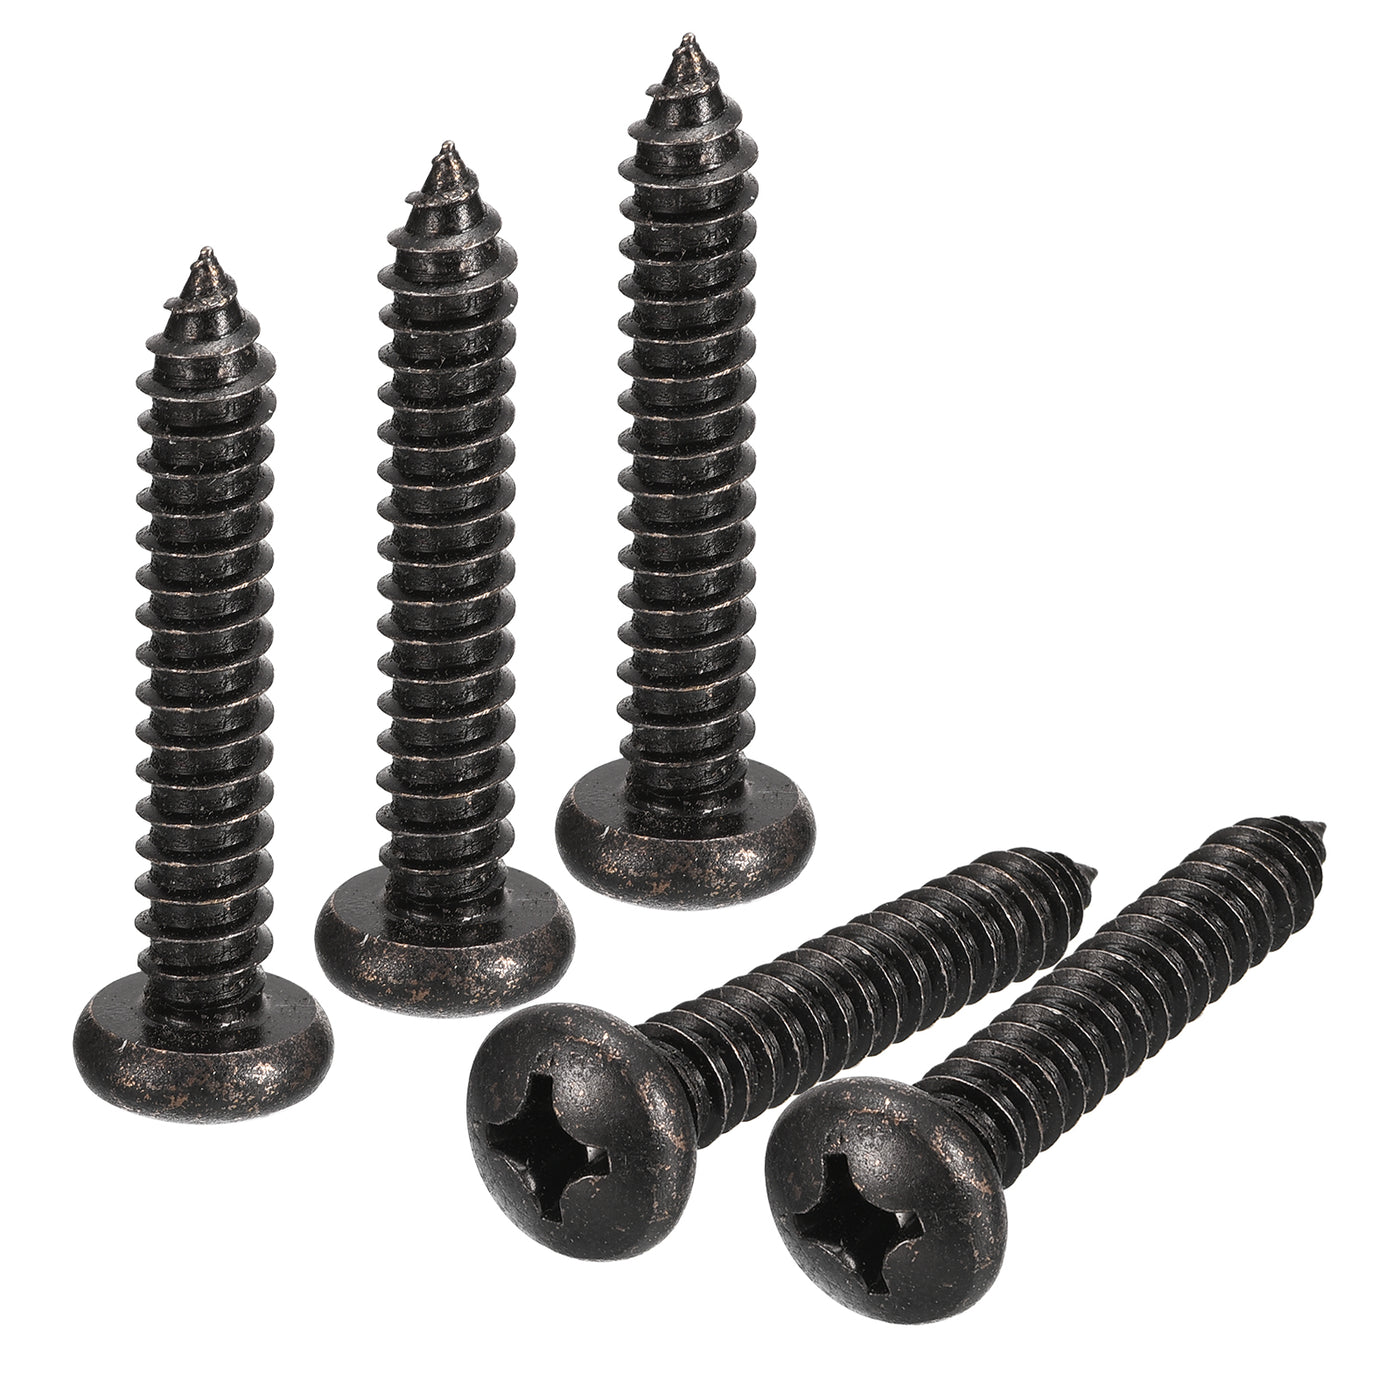 uxcell Uxcell #12 x 1-1/2" Phillips Pan Head Self-tapping Screw, 50pcs - 304 Stainless Steel Round Head Wood Screw Full Thread (Black)